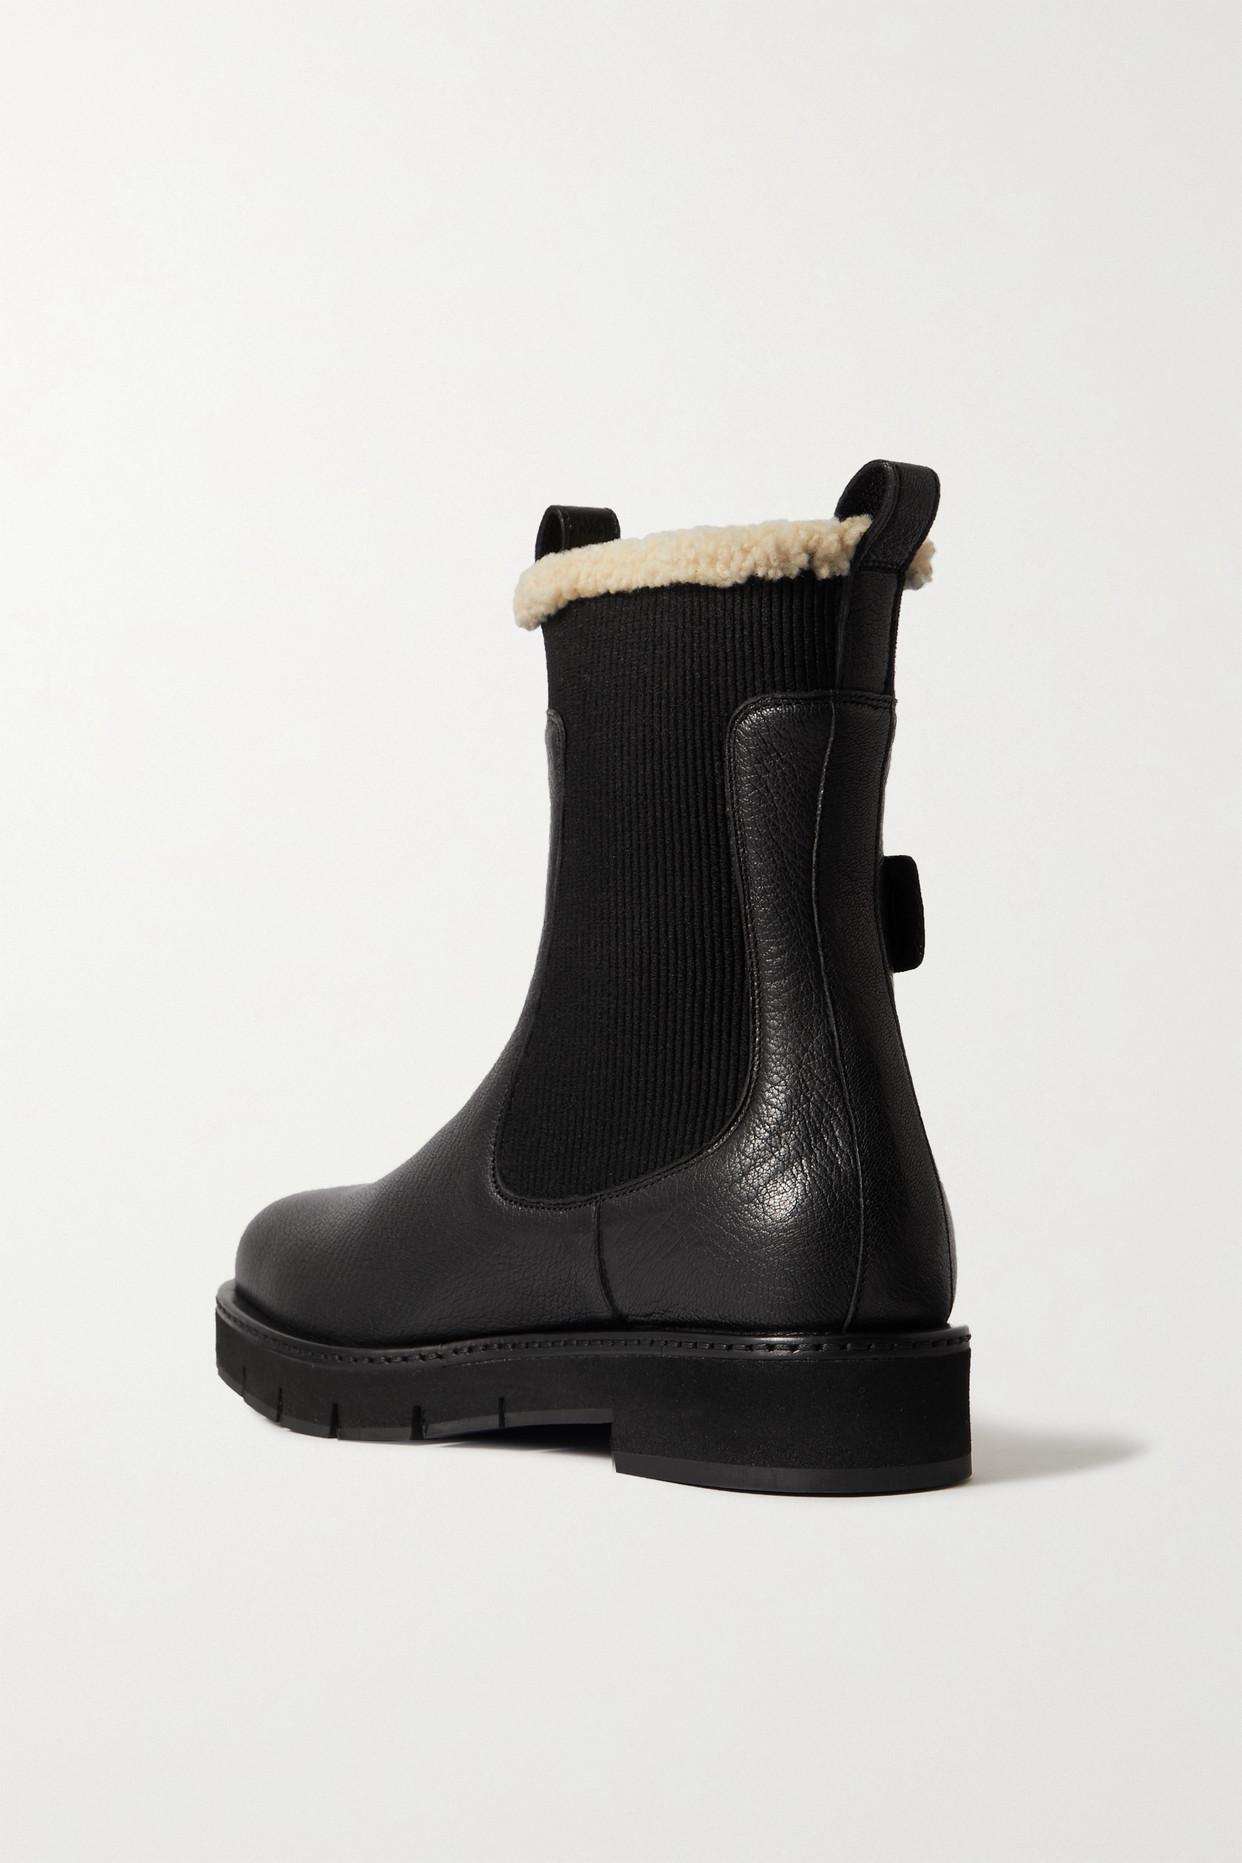 Ferragamo Shearling-lined Leather Ankle Boots in Black | Lyst